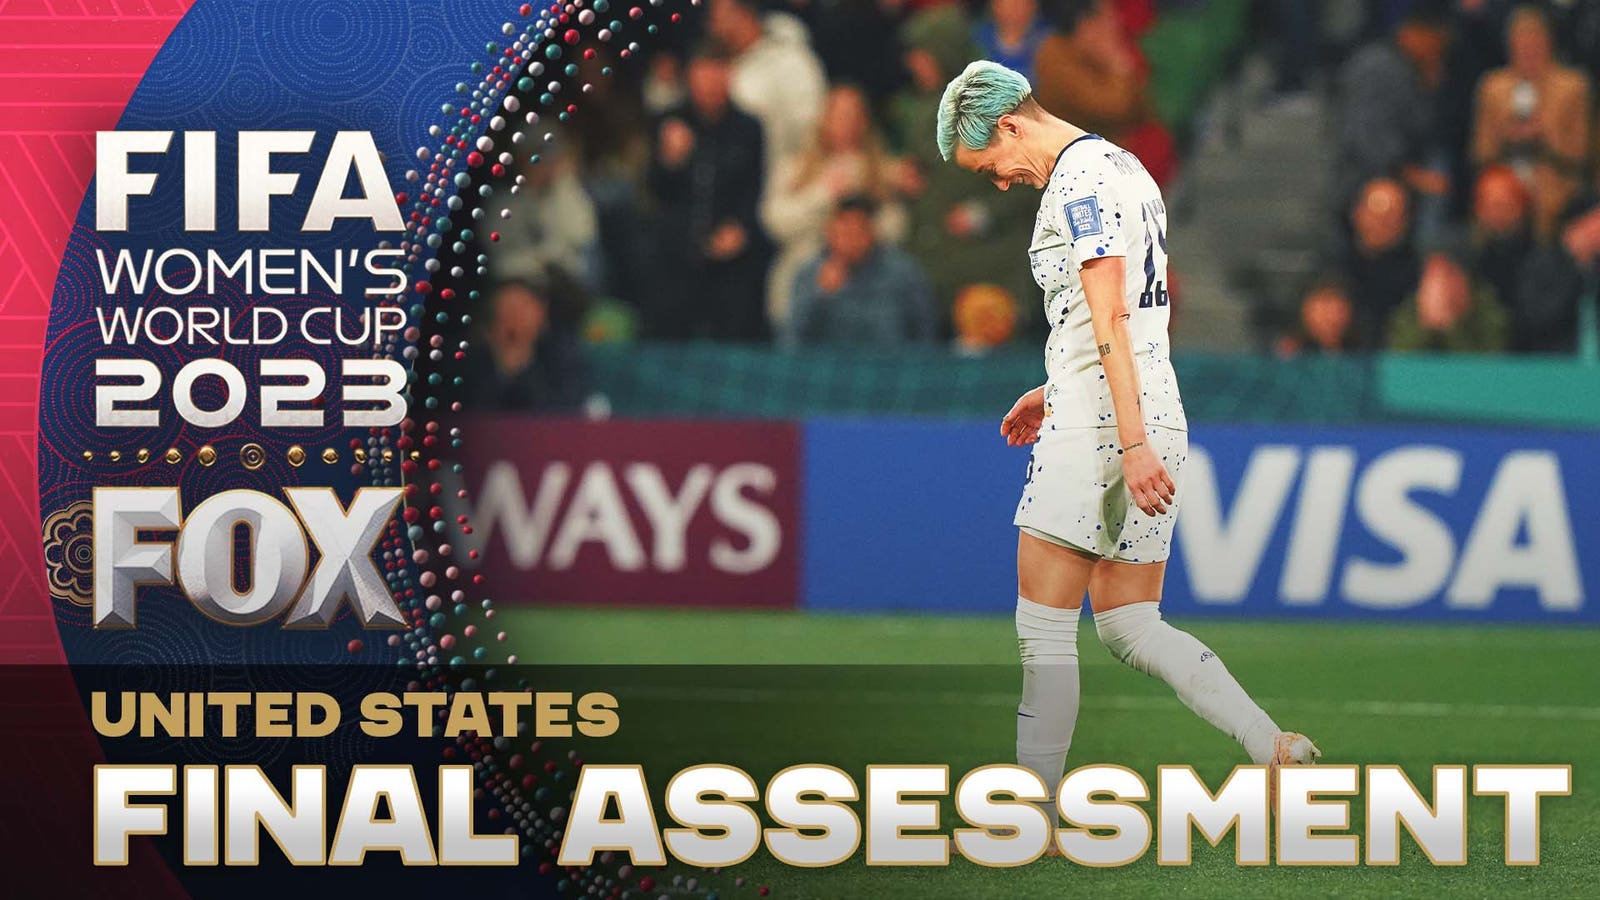 'World Cup Live' crew's final assessments for the USWNT